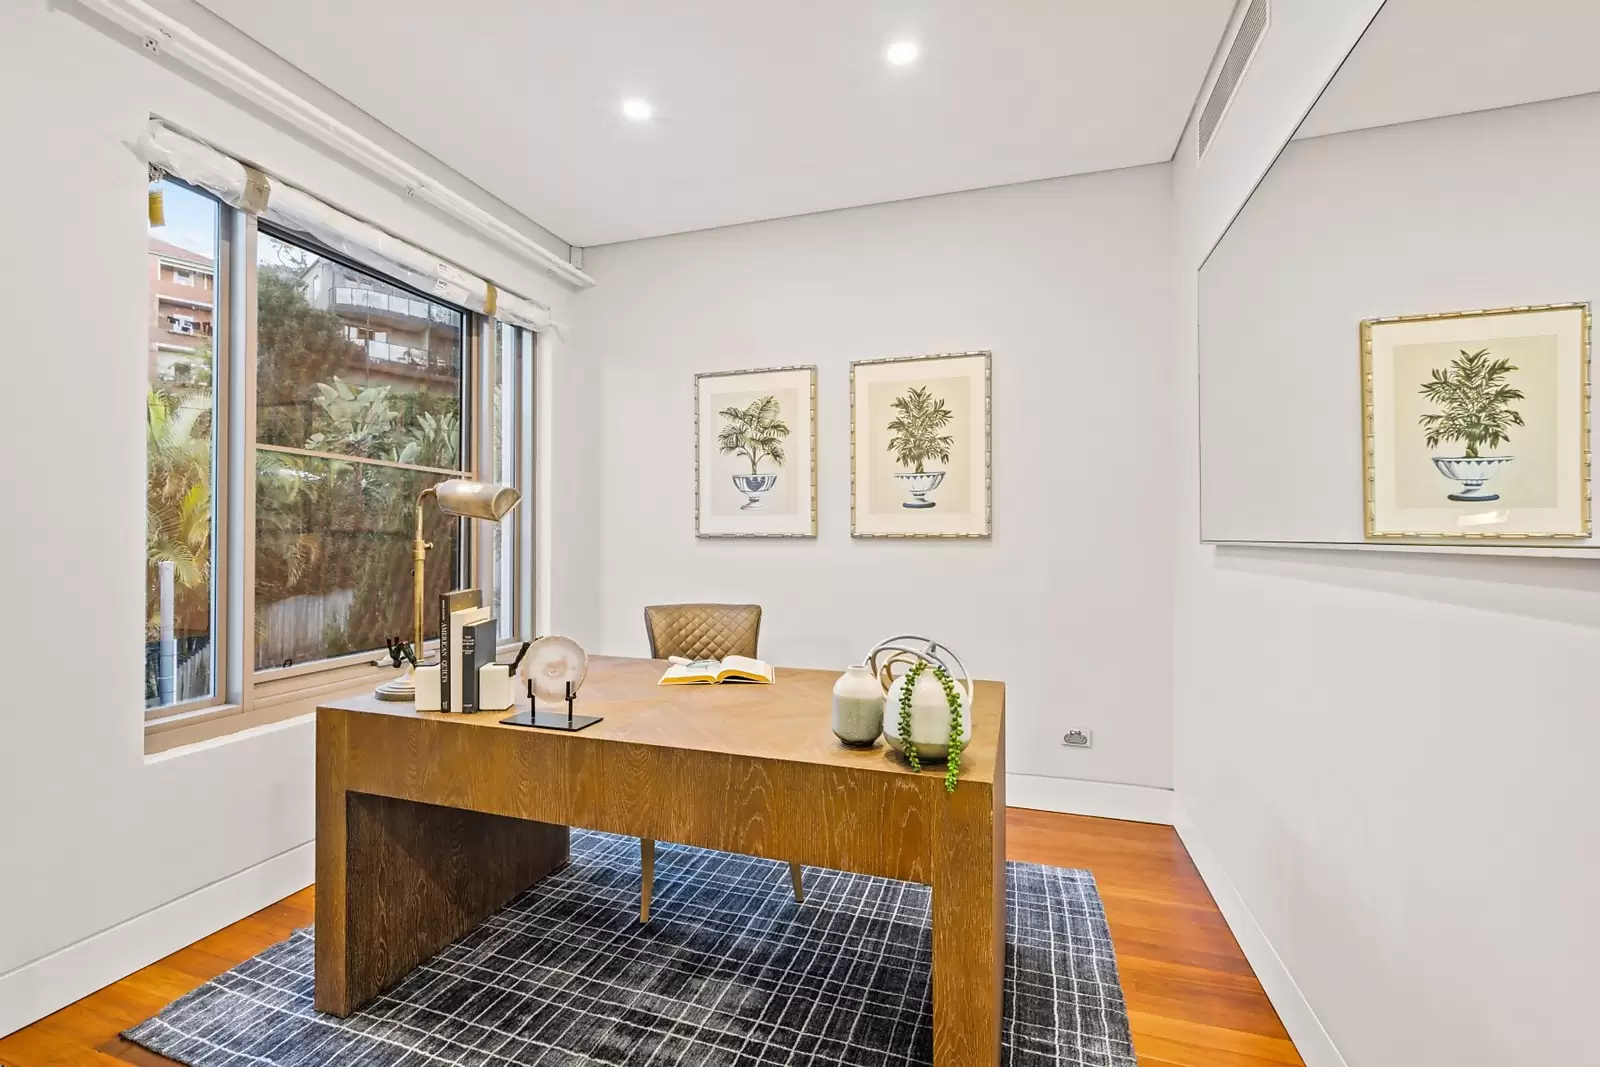 Photo #12: 5 Milton Avenue, Woollahra - Sold by Sydney Sotheby's International Realty